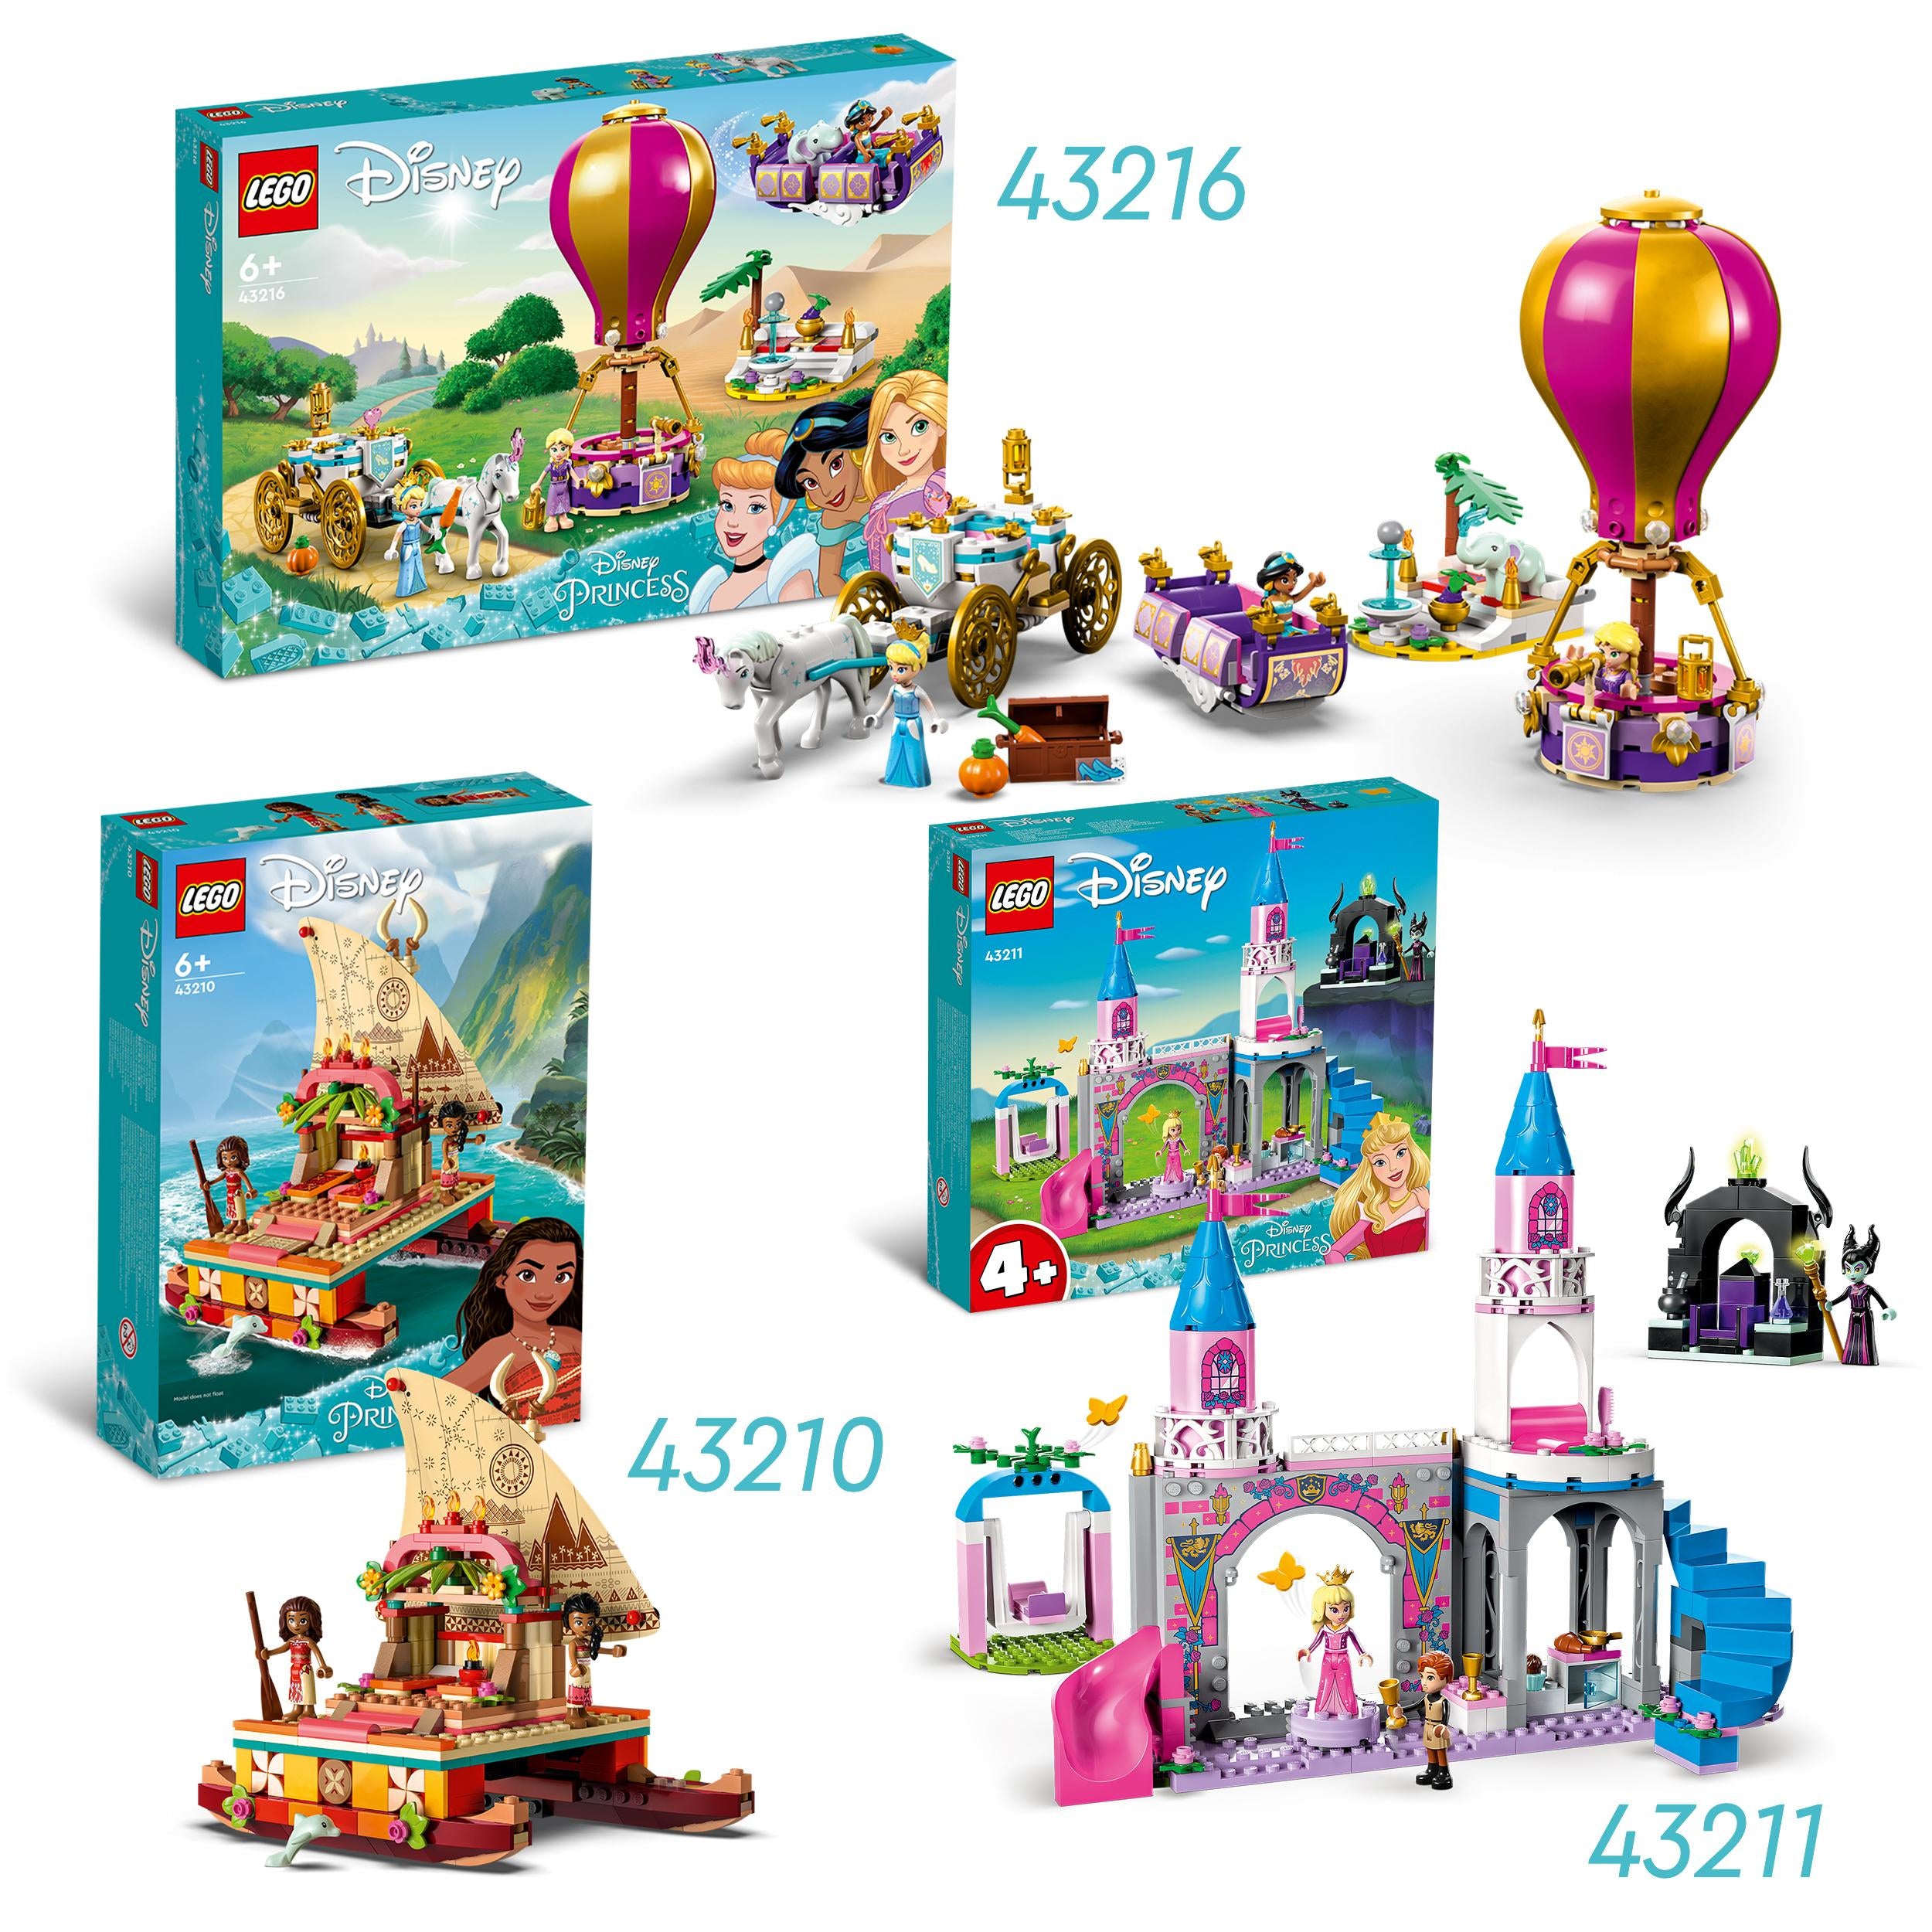  LEGO Disney Princess Enchanted Journey Building Set - 3in1  Playset with Cinderella, Jasmine, Rapunzel Mini Dolls, Toy Horse &  Carriage, Hot Air Balloon, Gift for Girls, Boys, and Kids Ages 6+